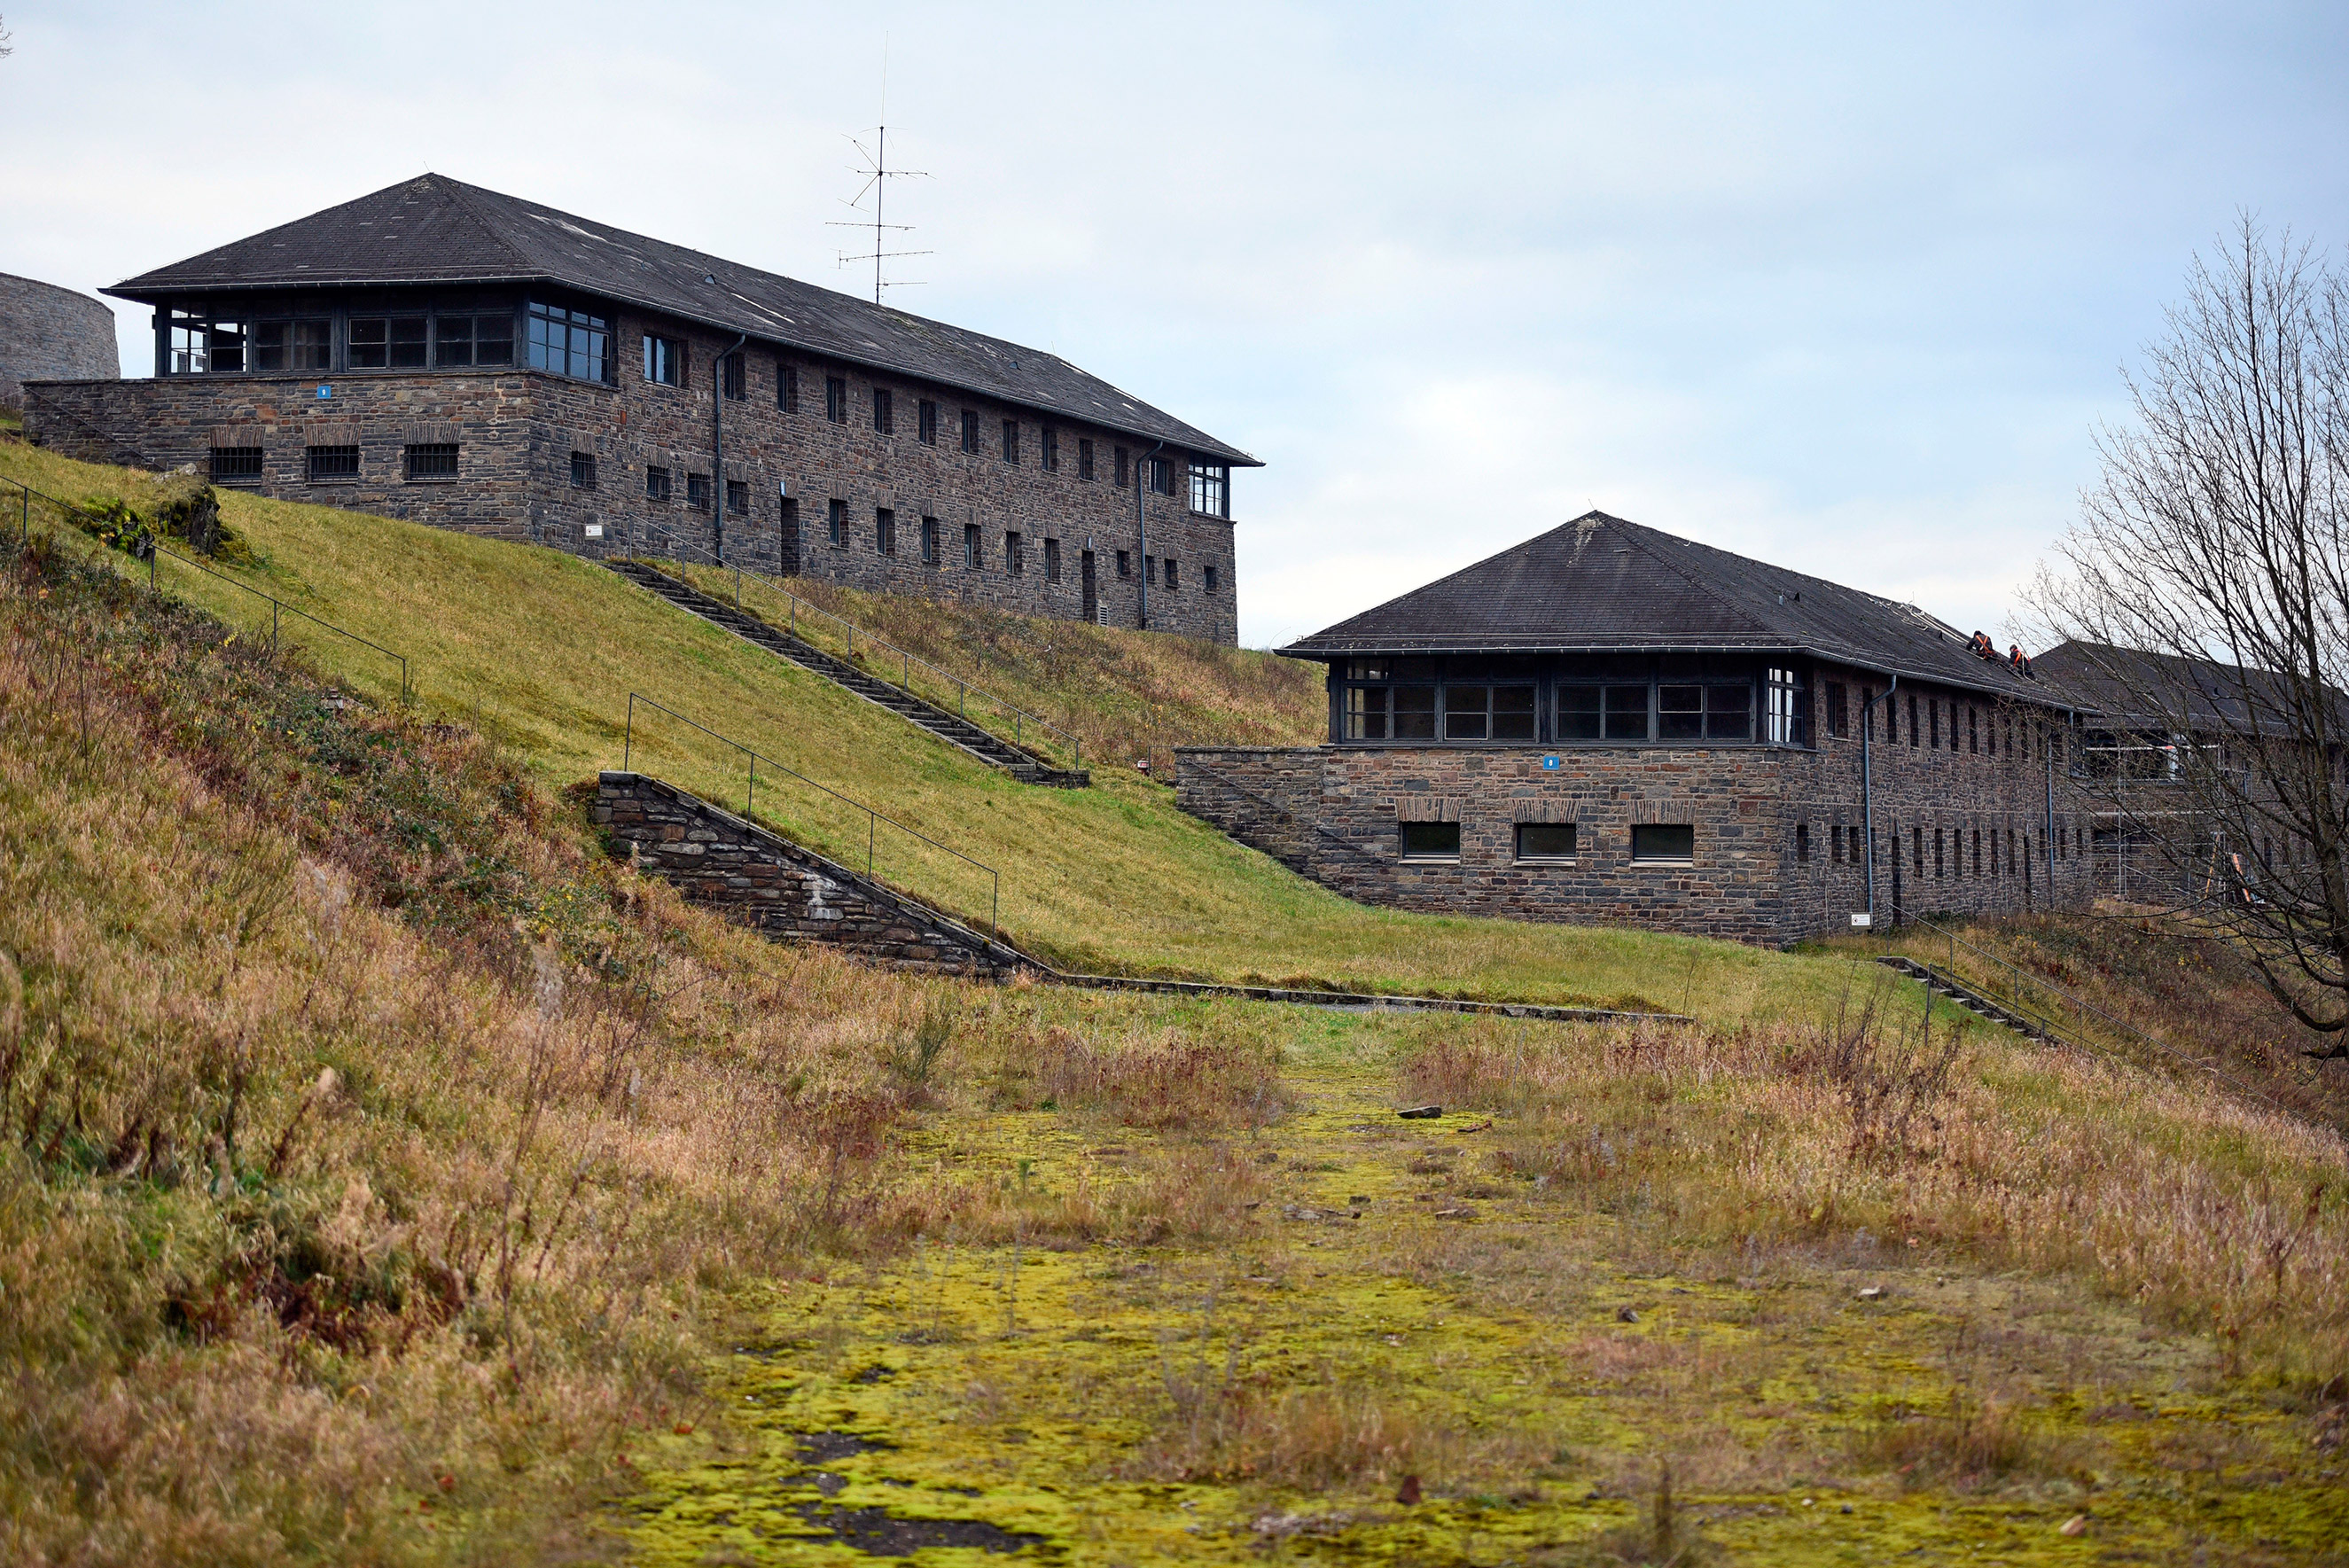 A view of the former Nazi leadership training center Vogelsang, with buildings and adjacent premises and facilities, in Schleiden, Germany,  Dec. 18, 2015. (Henning Kaiser—DPA/Landov)